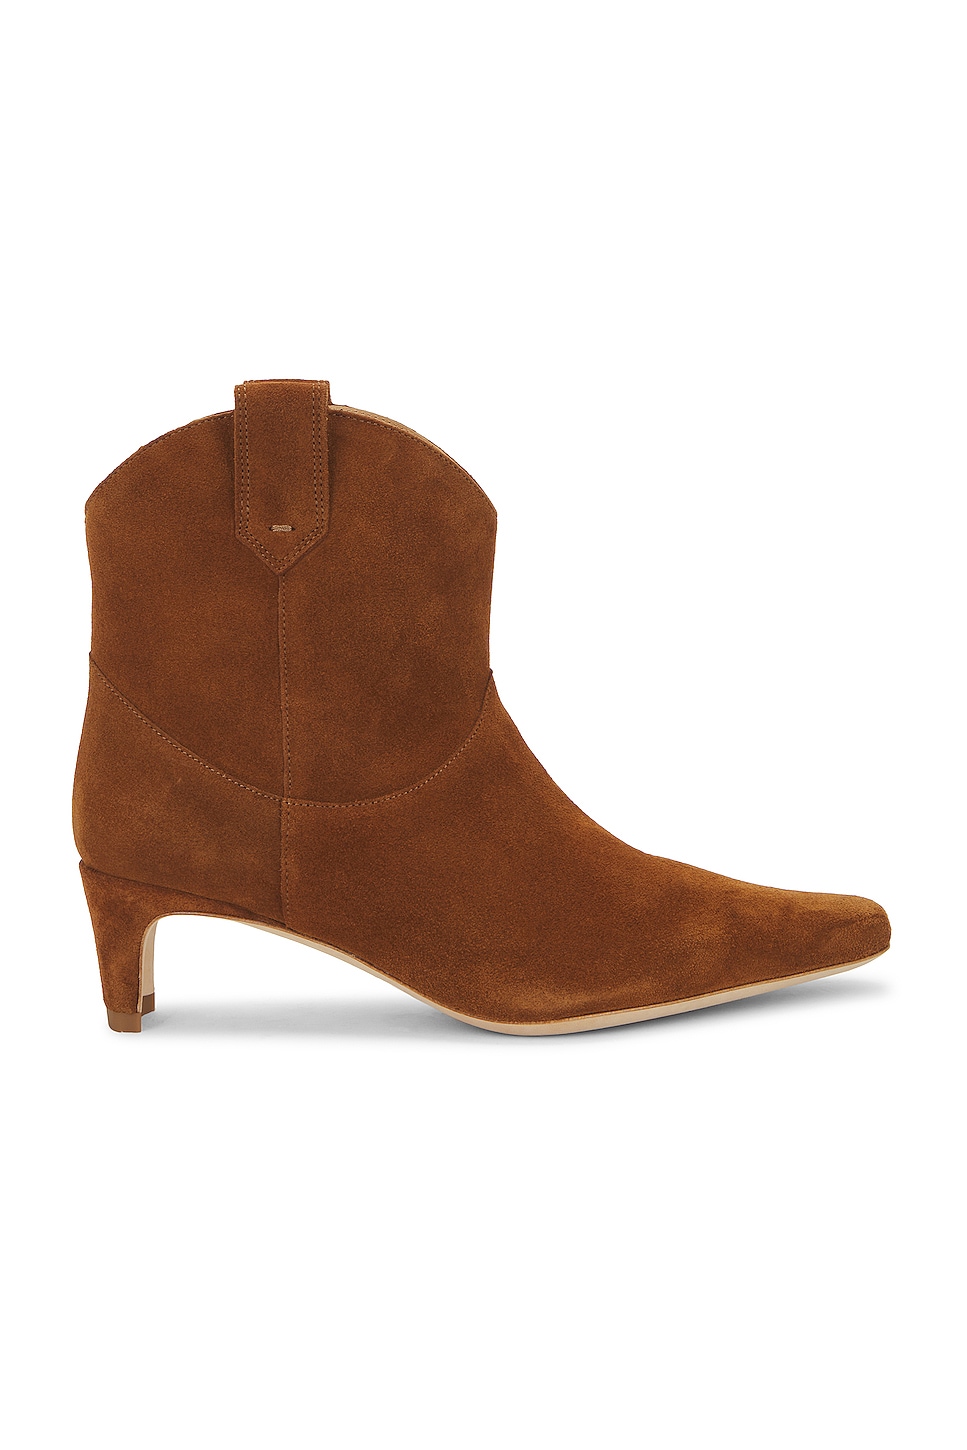 Image 1 of Staud Western Wally Ankle Boot in Tan